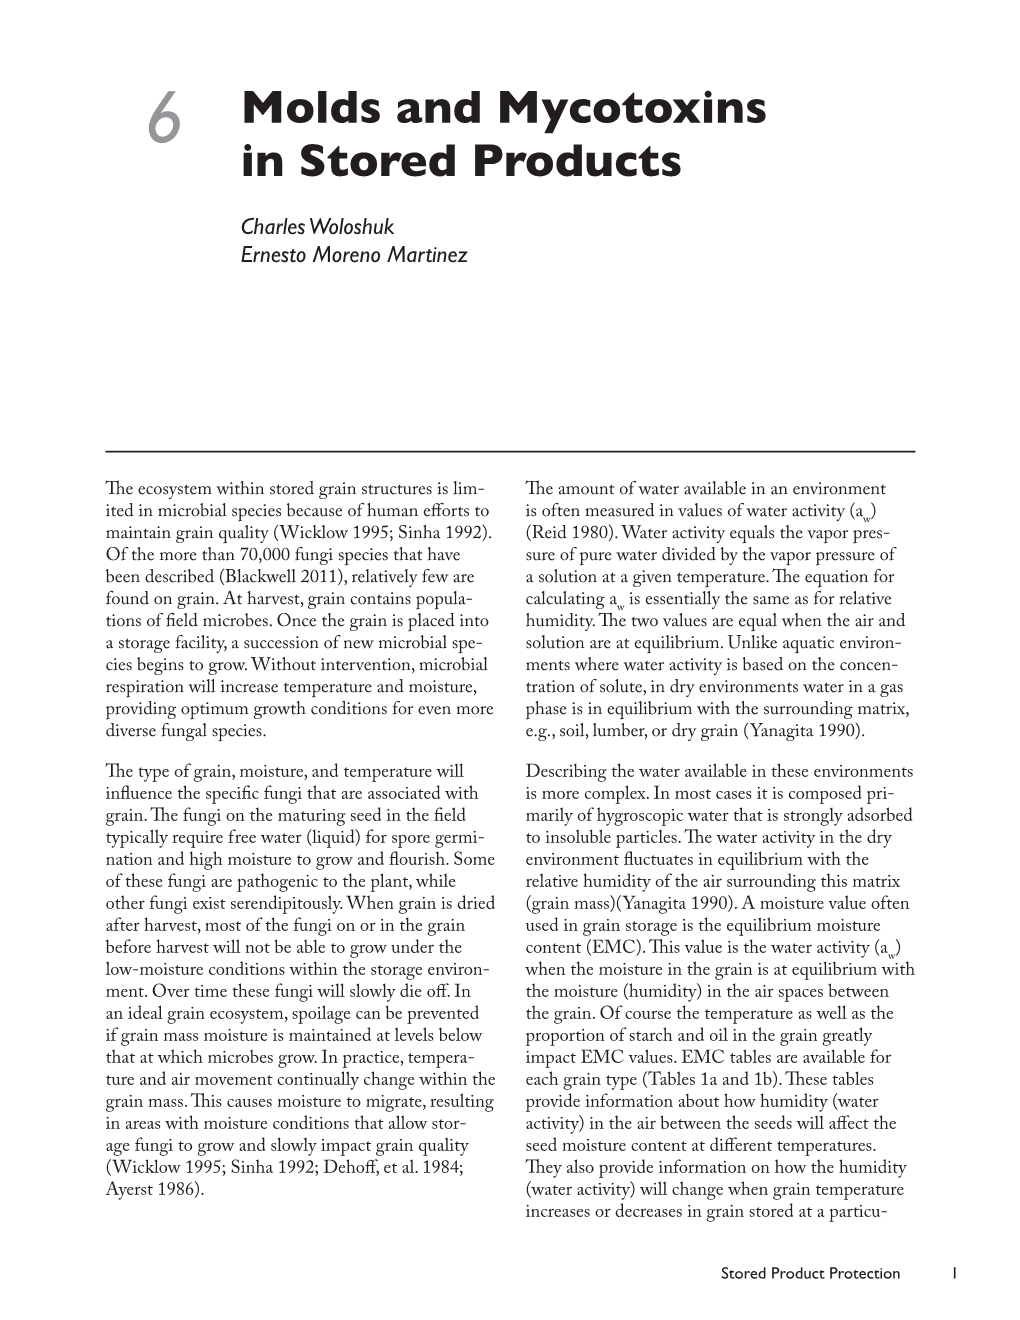 6 Molds and Mycotoxins in Stored Products